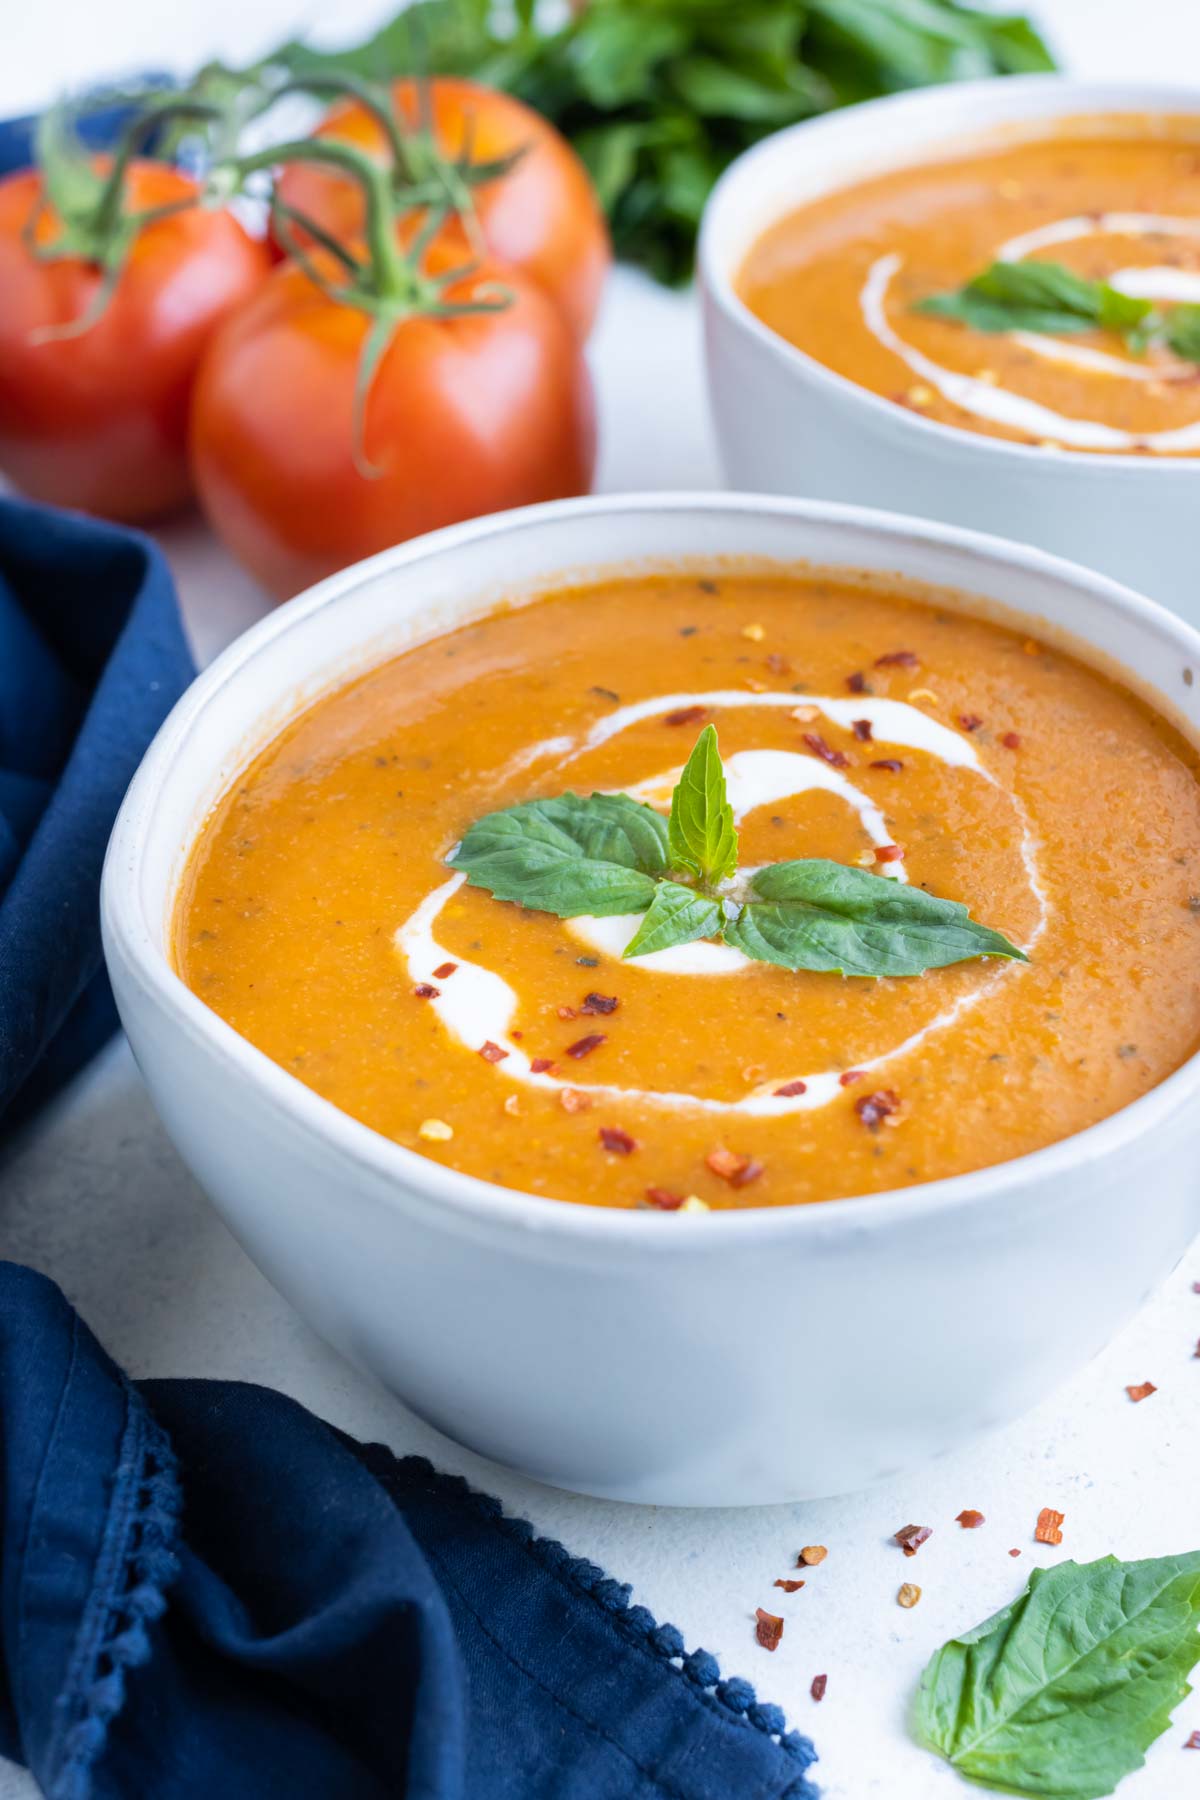 Top this bisque with cream and basil.